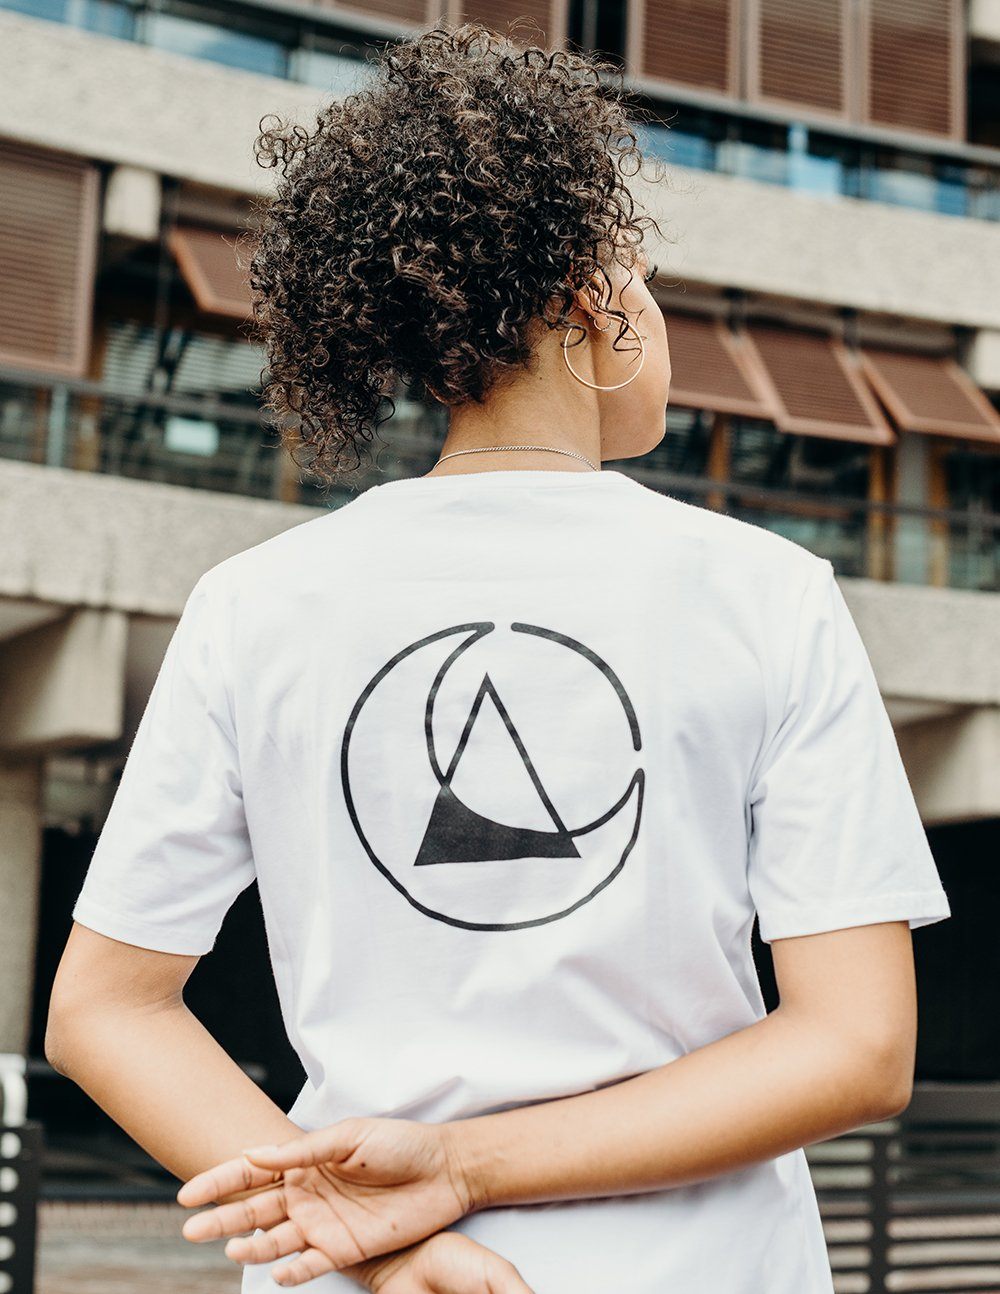 unisex white branded t-shirt handmade using organic cotton by ethical gender neutral streetwear brand Androgyny UK